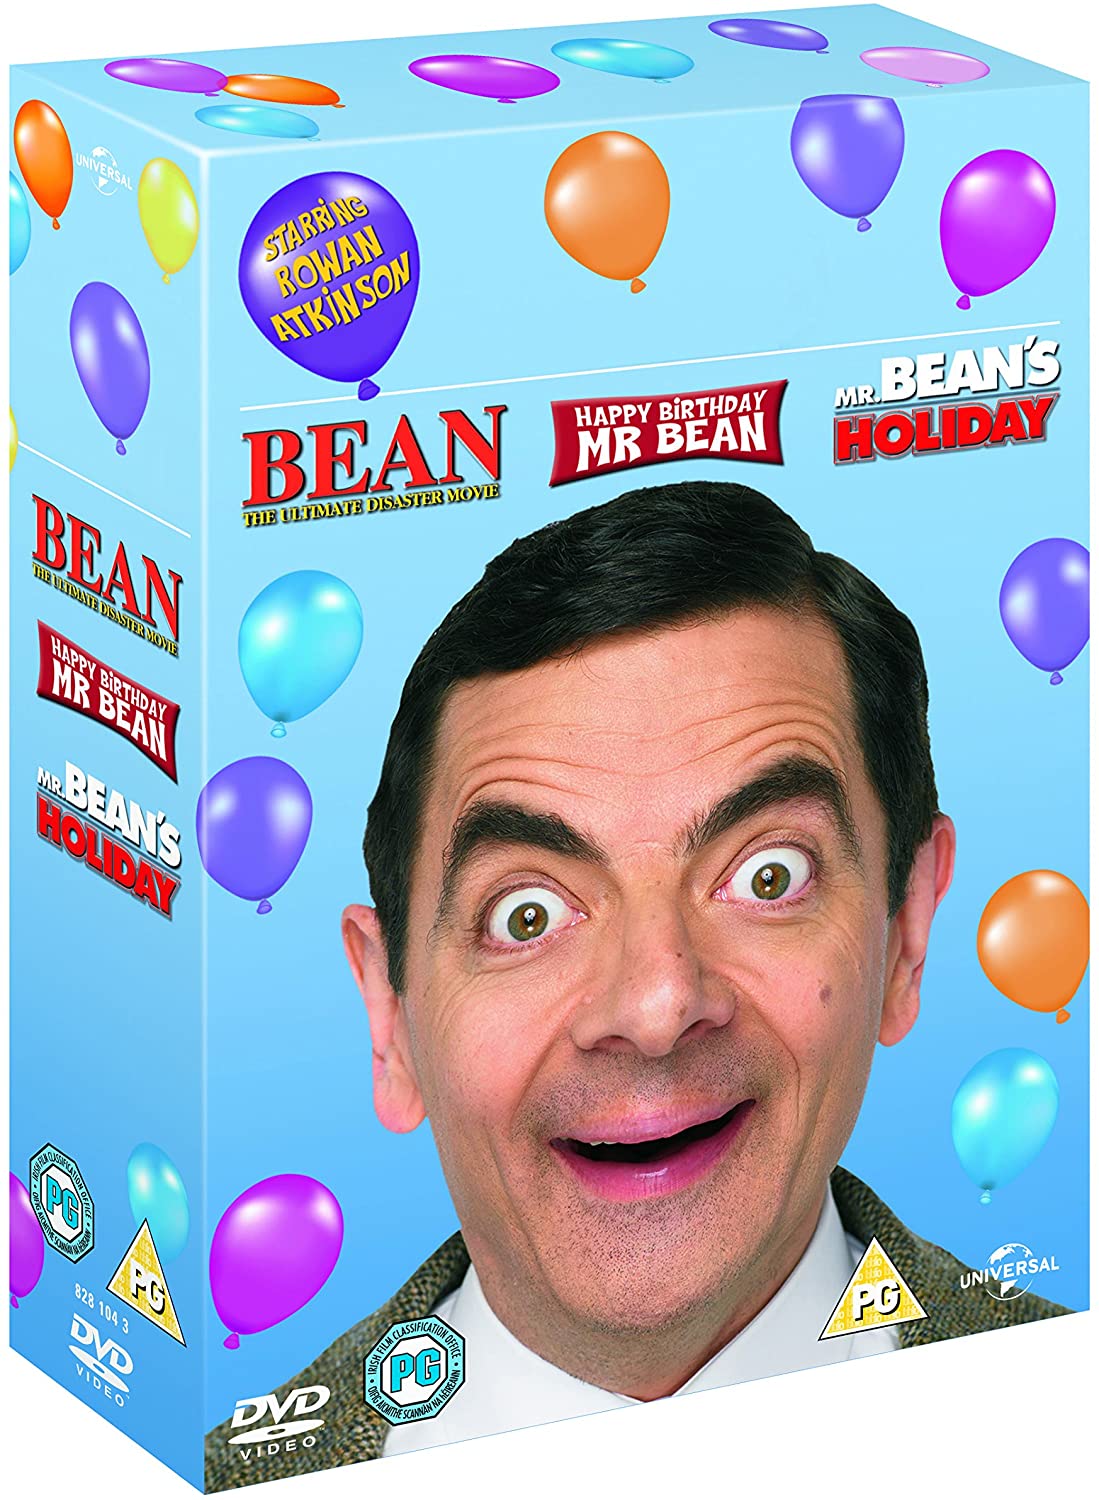 Mr Bean: 20 Years of Mr Bean 3 Film Collection (DVD)